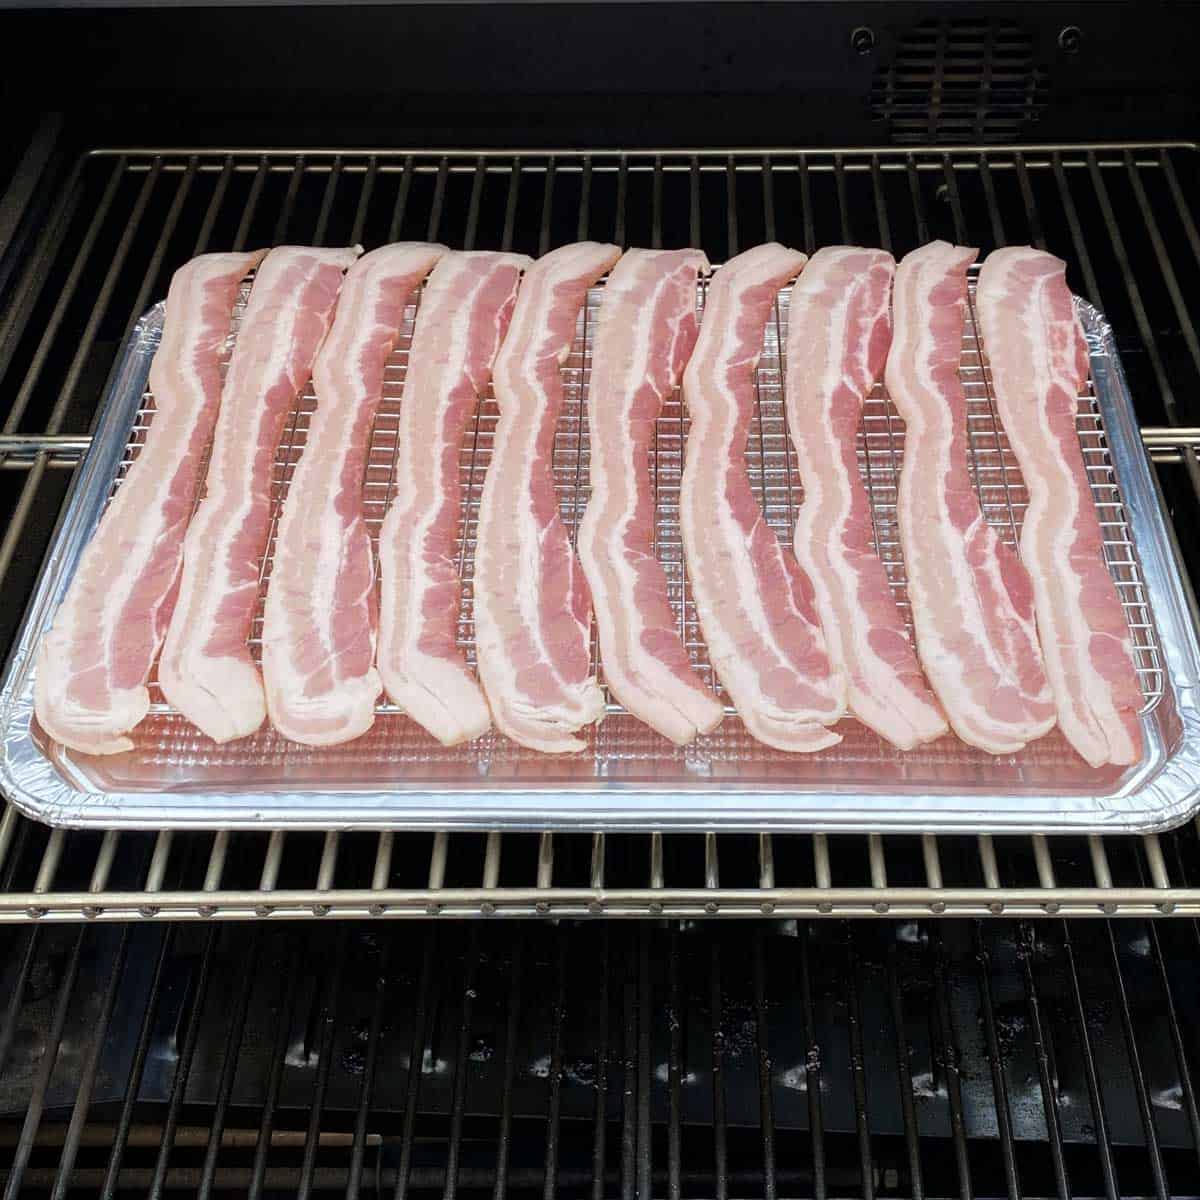 uncooked bacon on a foil baking sheet set inside a pellet smoker ready to be cooked.